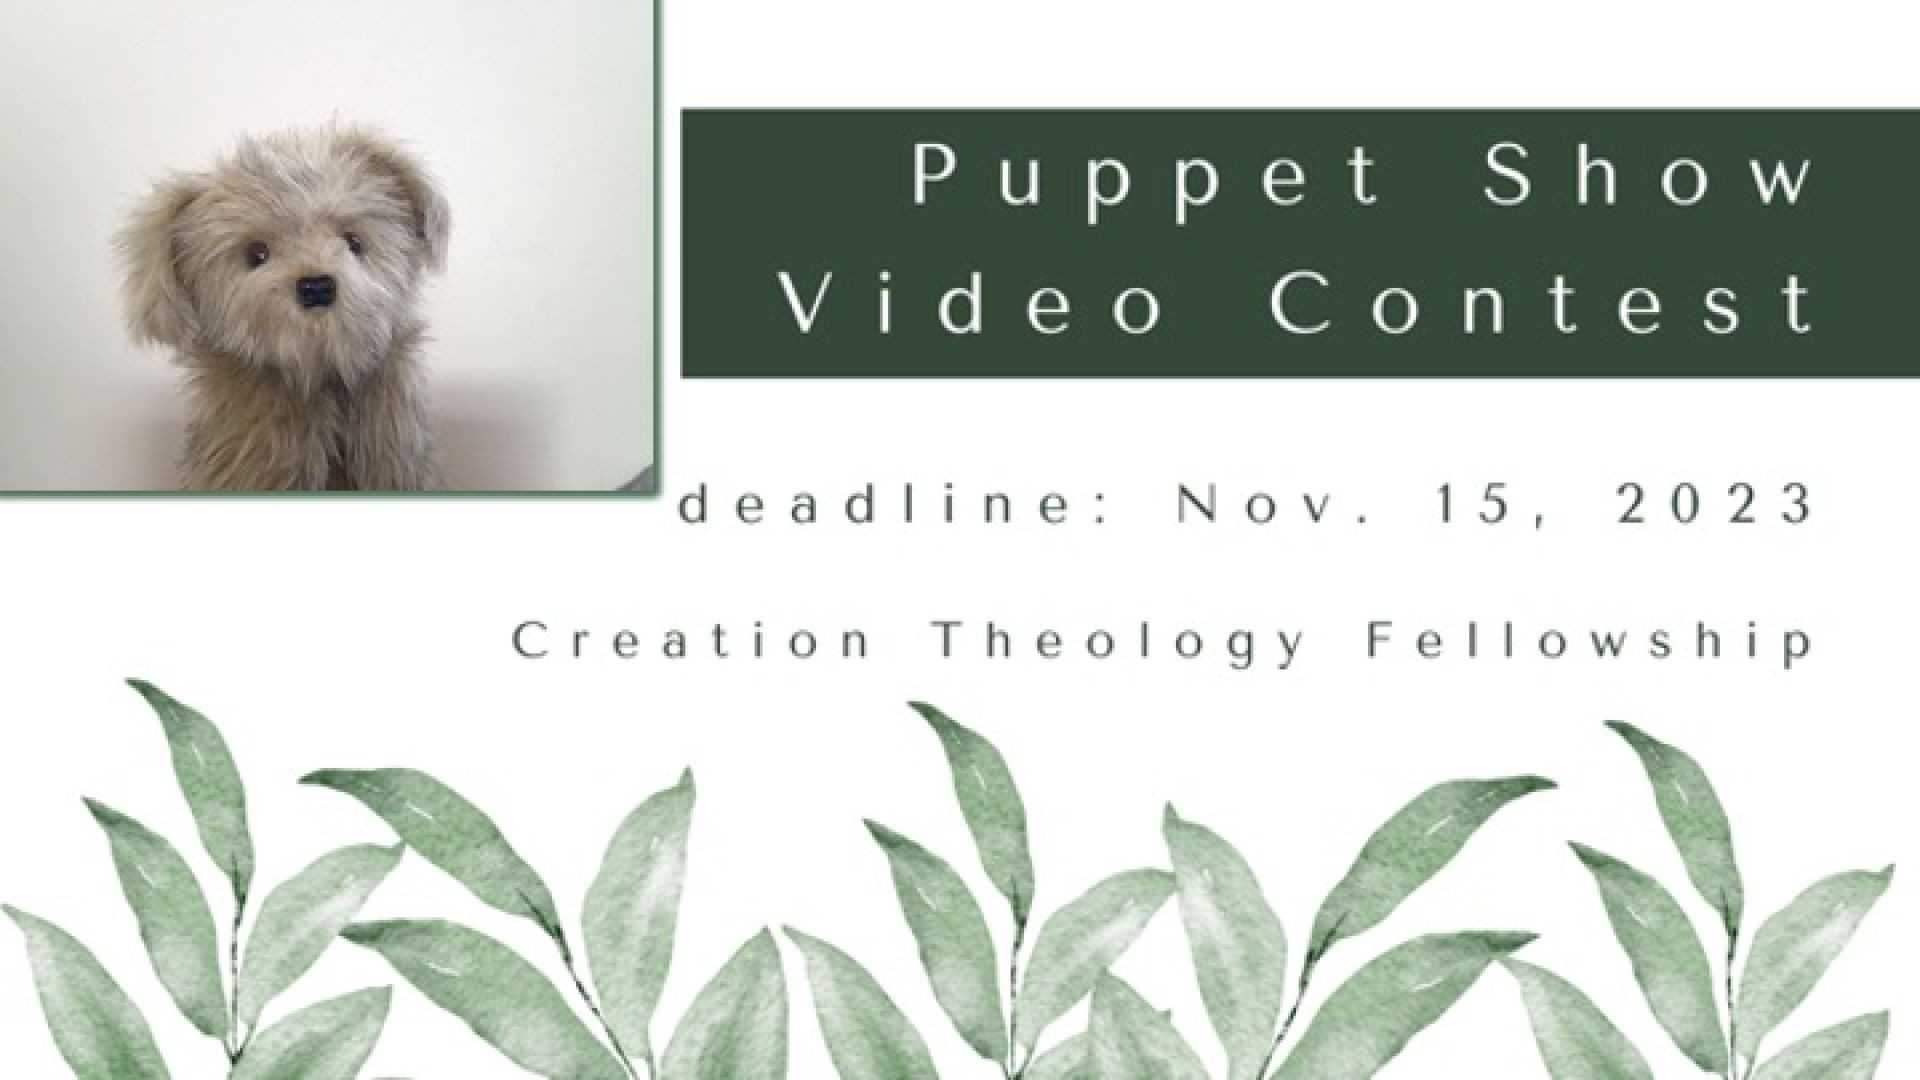 Puppet Video Contest: "The Days of Creation"